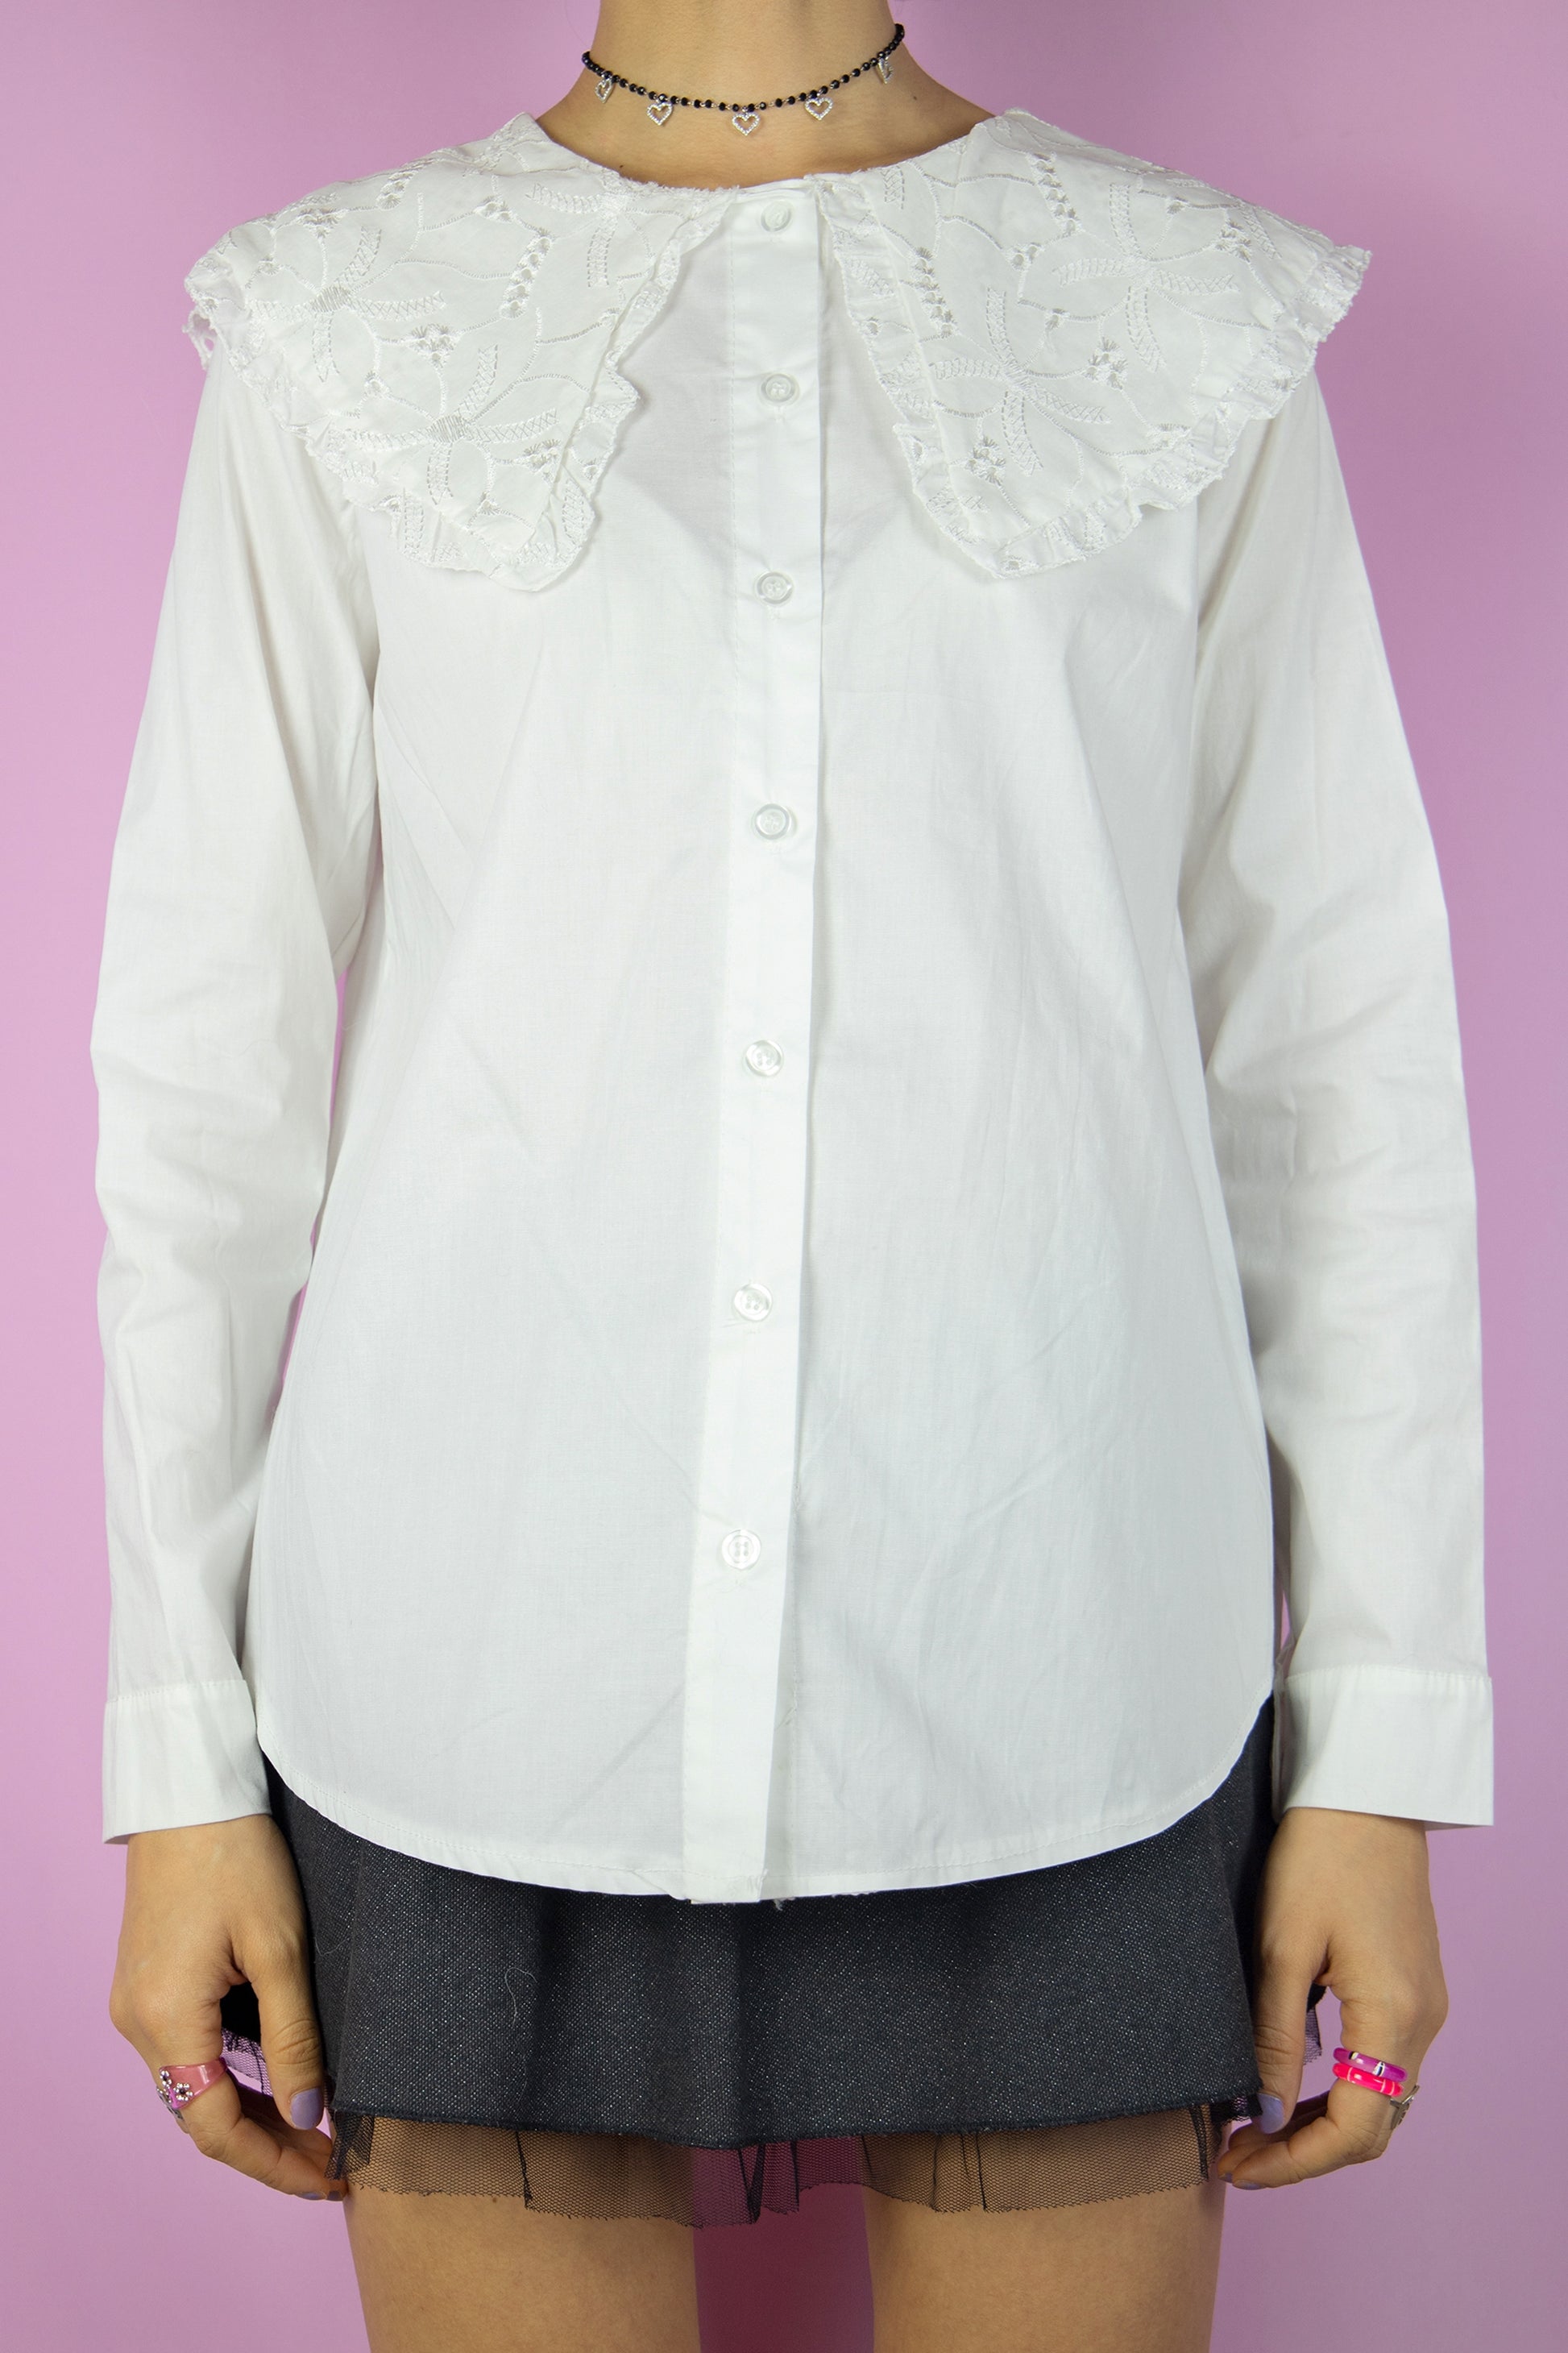 The Vintage Y2K White Oversized Collar Blouse is a charming long-sleeve button top featuring a large cream-white collar adorned with embroidered details. This super cute shirt exudes cottage prairie, goth, and grunge vibes, making it a perfect addition to your wardrobe from the 2000s.